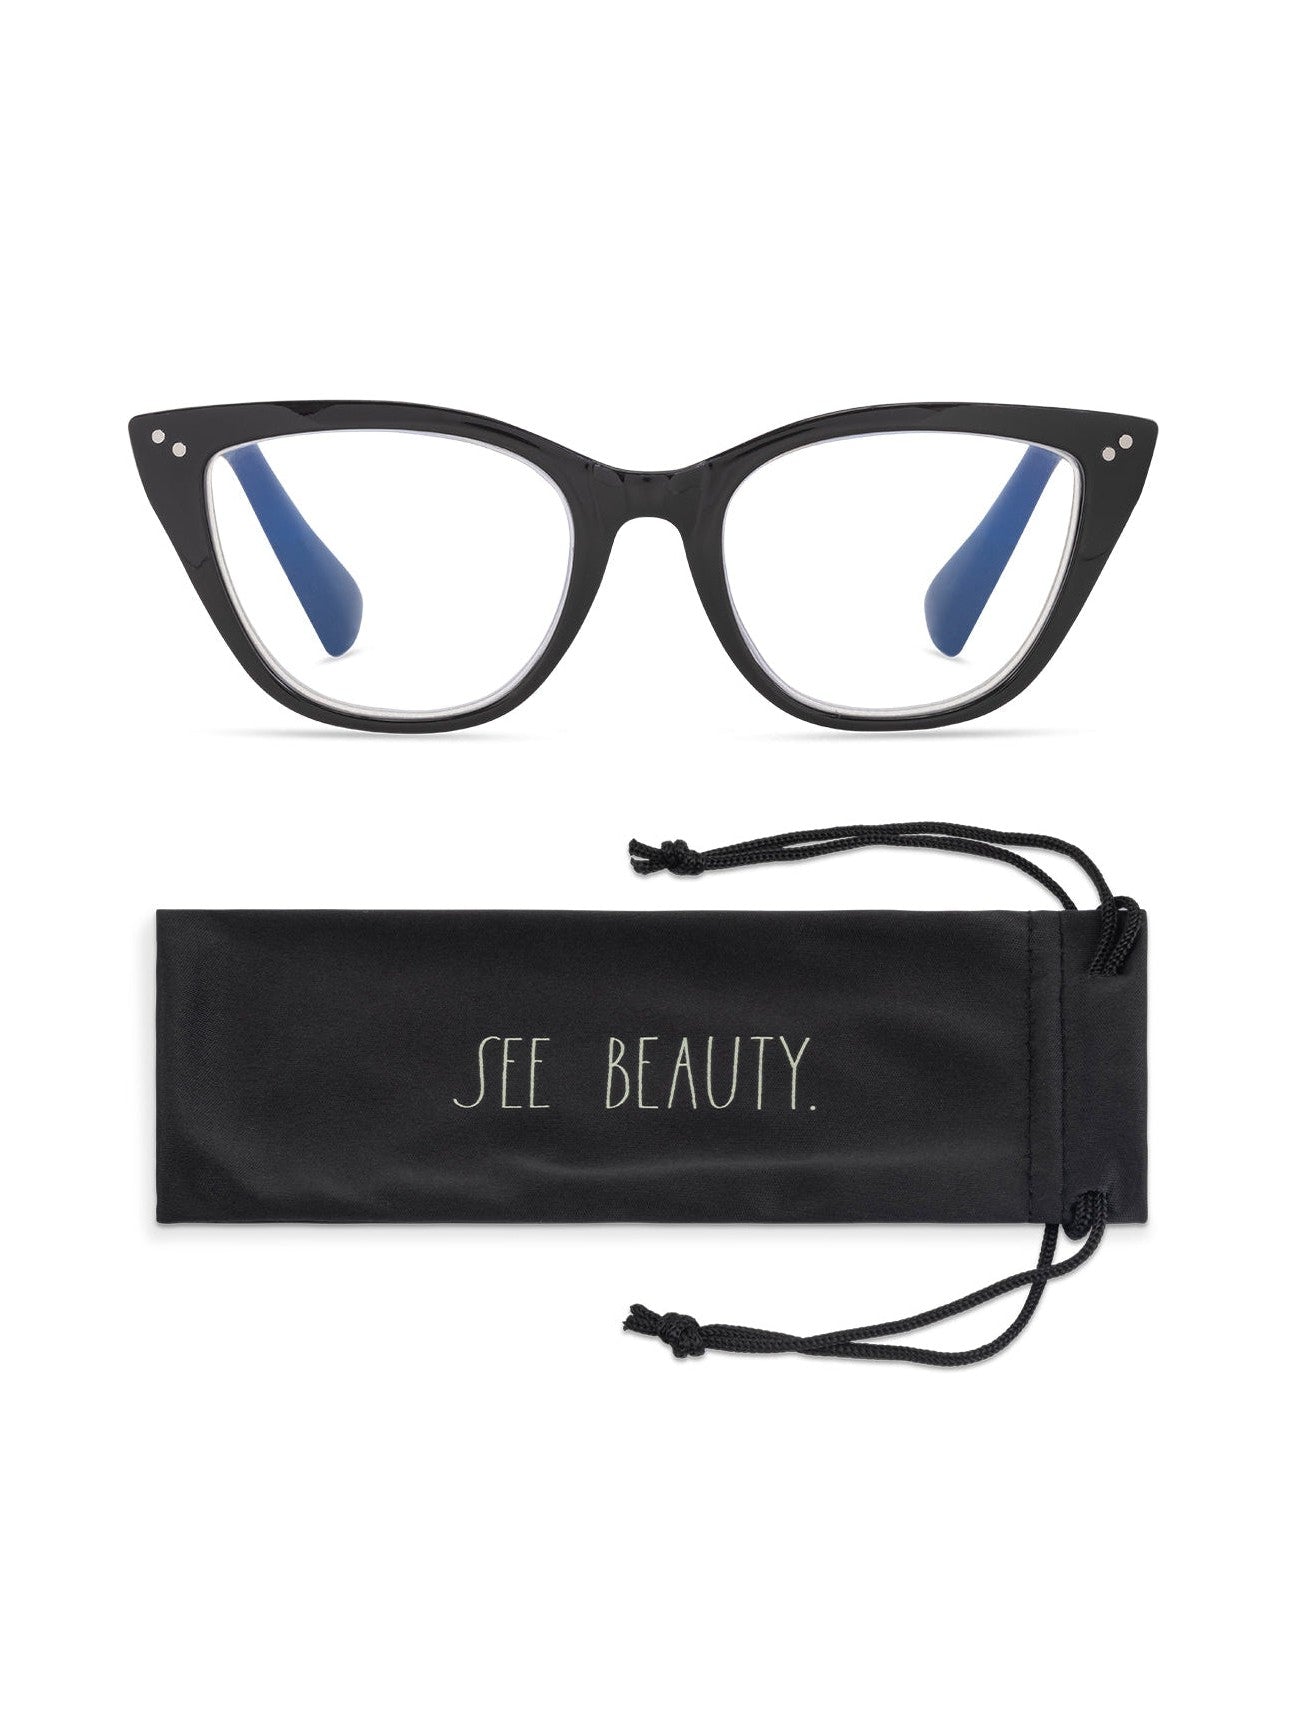 BELLA Blue Light Blocking Reading Glasses with "SEE BEAUTY" Signature - Rae Dunn Wear